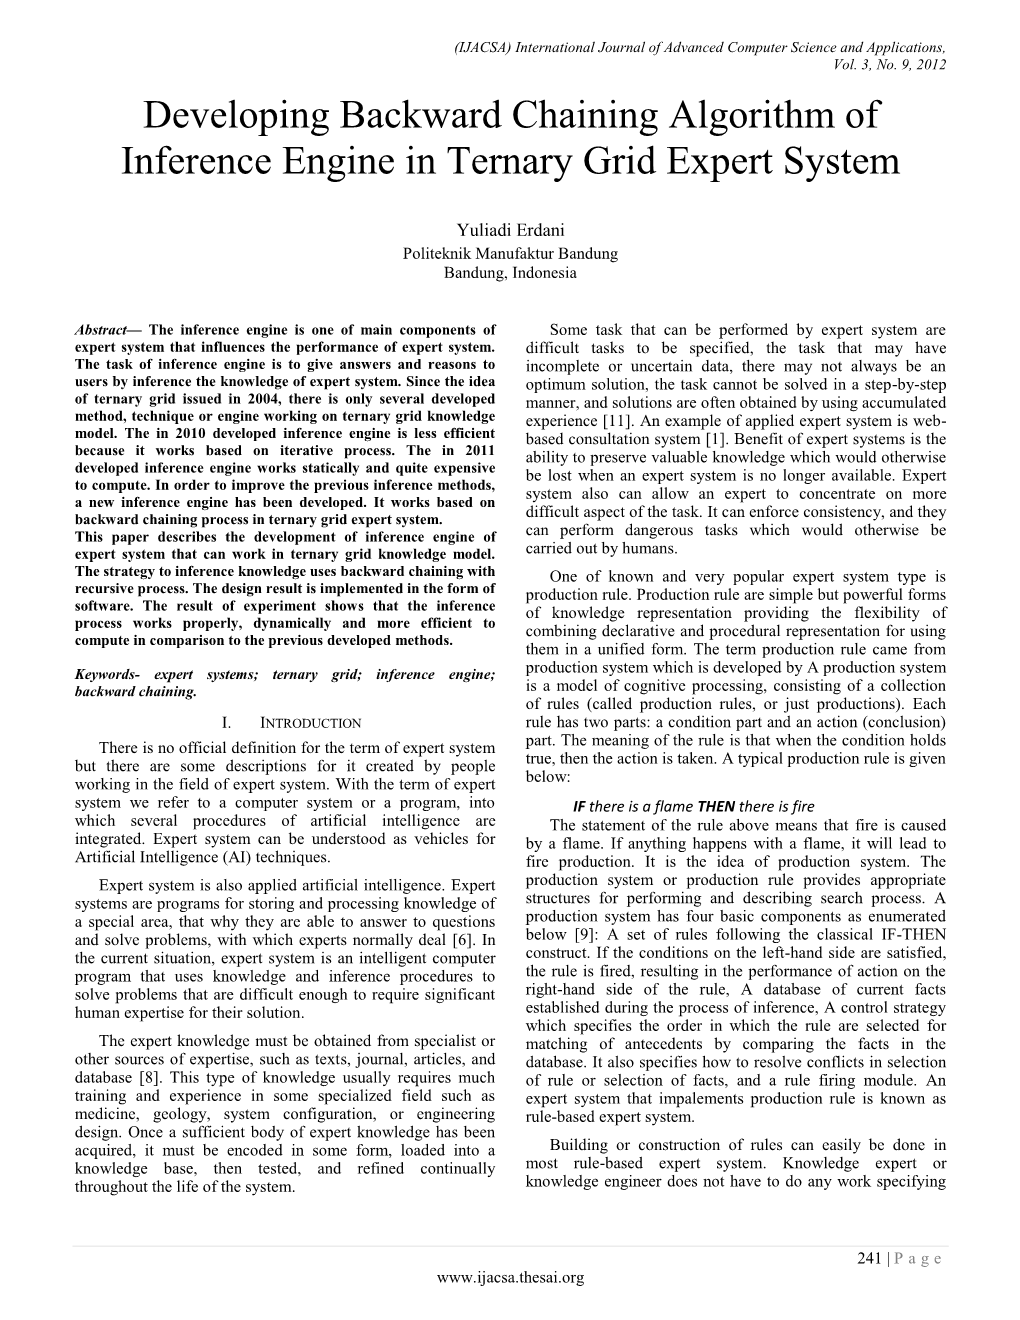 Developing Backward Chaining Algorithm of Inference Engine in Ternary Grid Expert System